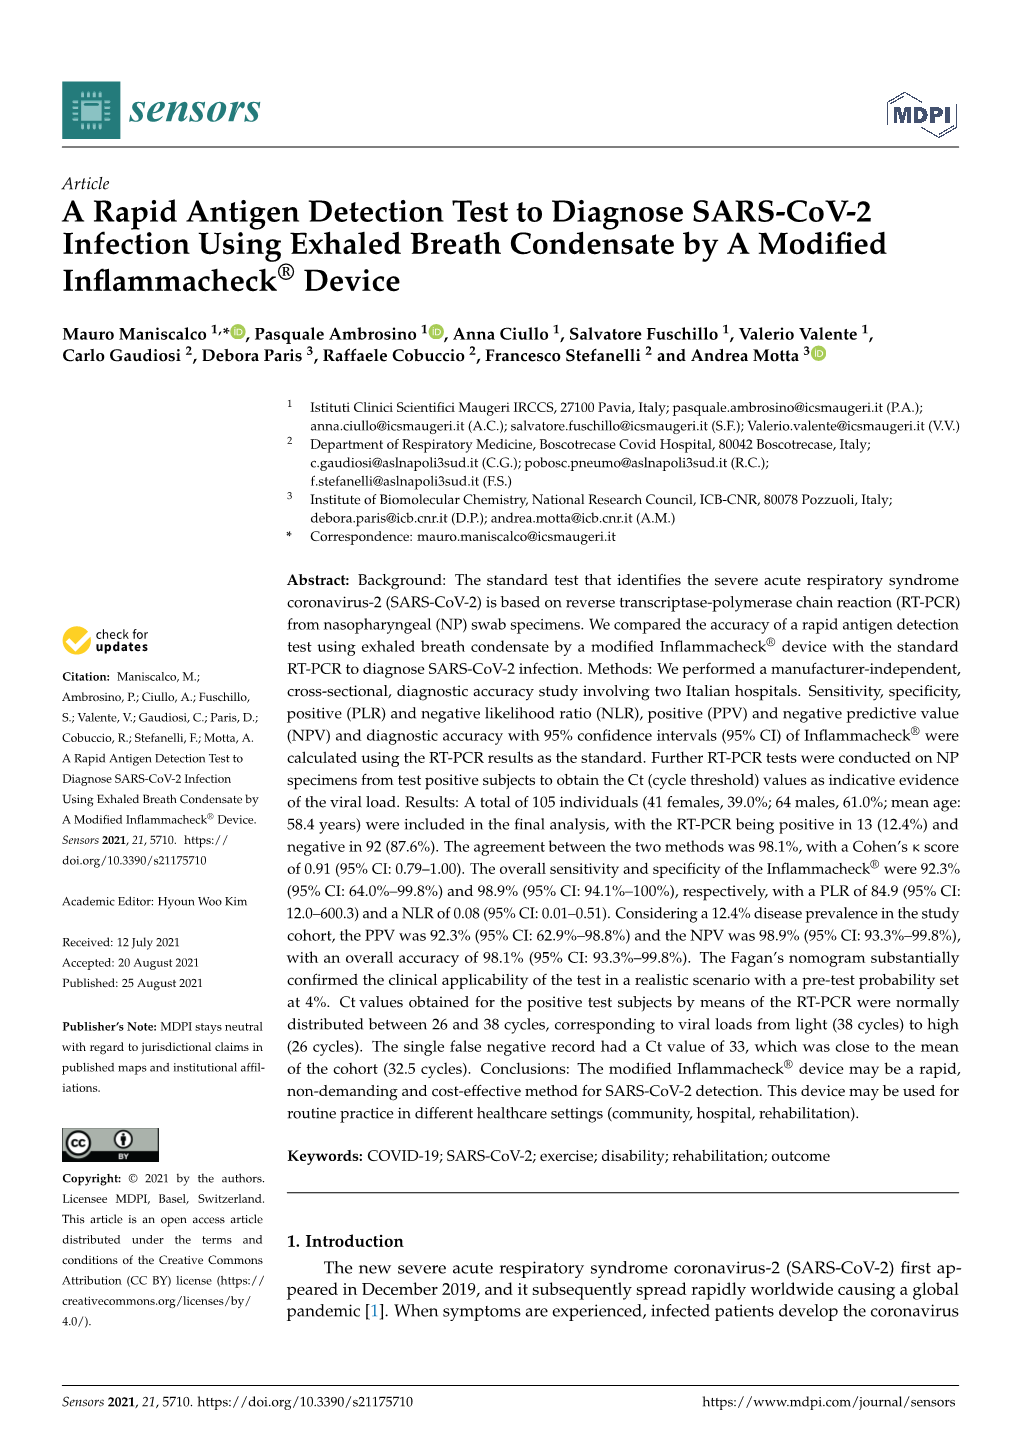 A Rapid Antigen Detection Test to Diagnose SARS-Cov-2 Infection Using Exhaled Breath Condensate by a Modiﬁed Inﬂammacheck® Device